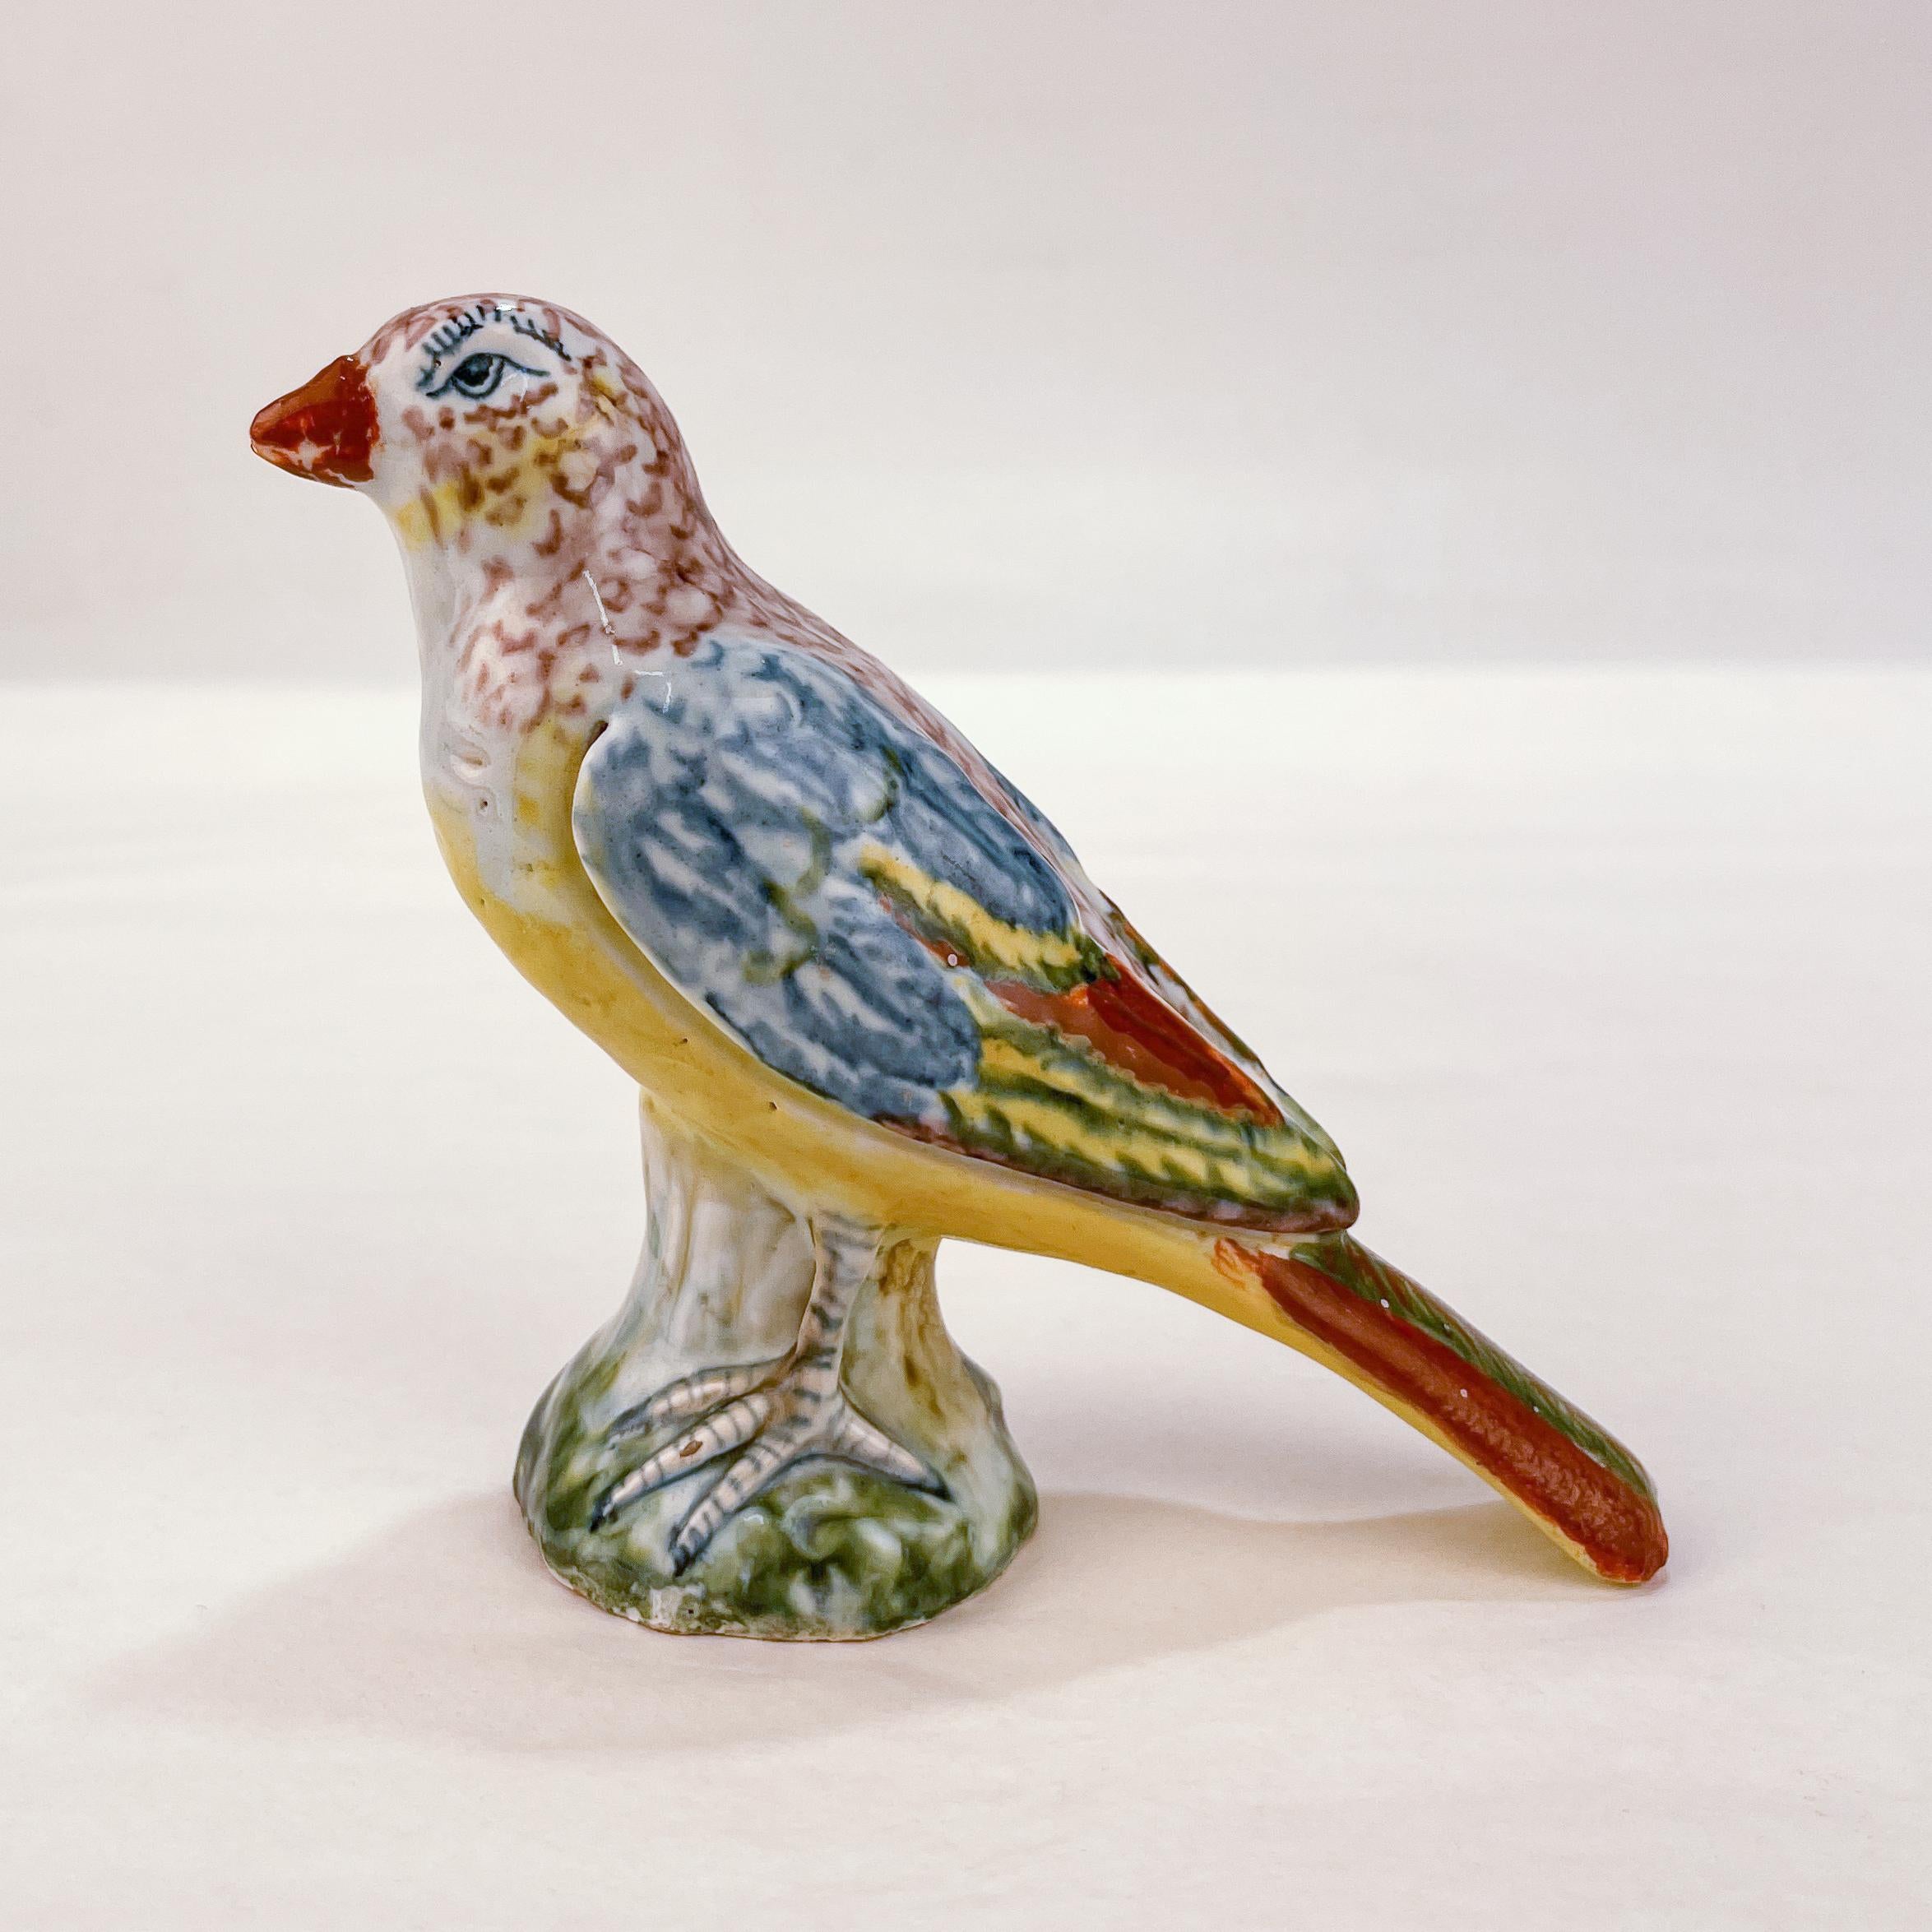 A rare, antique Dutch Delft pottery figurine.

Modeled as a small bird on a figural tree stump plinth.

With a crimson painted AP maker's mark painted to the bottom. Possibly for Anthonij Pennis (1750-1770) or his widow Pennis-Overgaauw